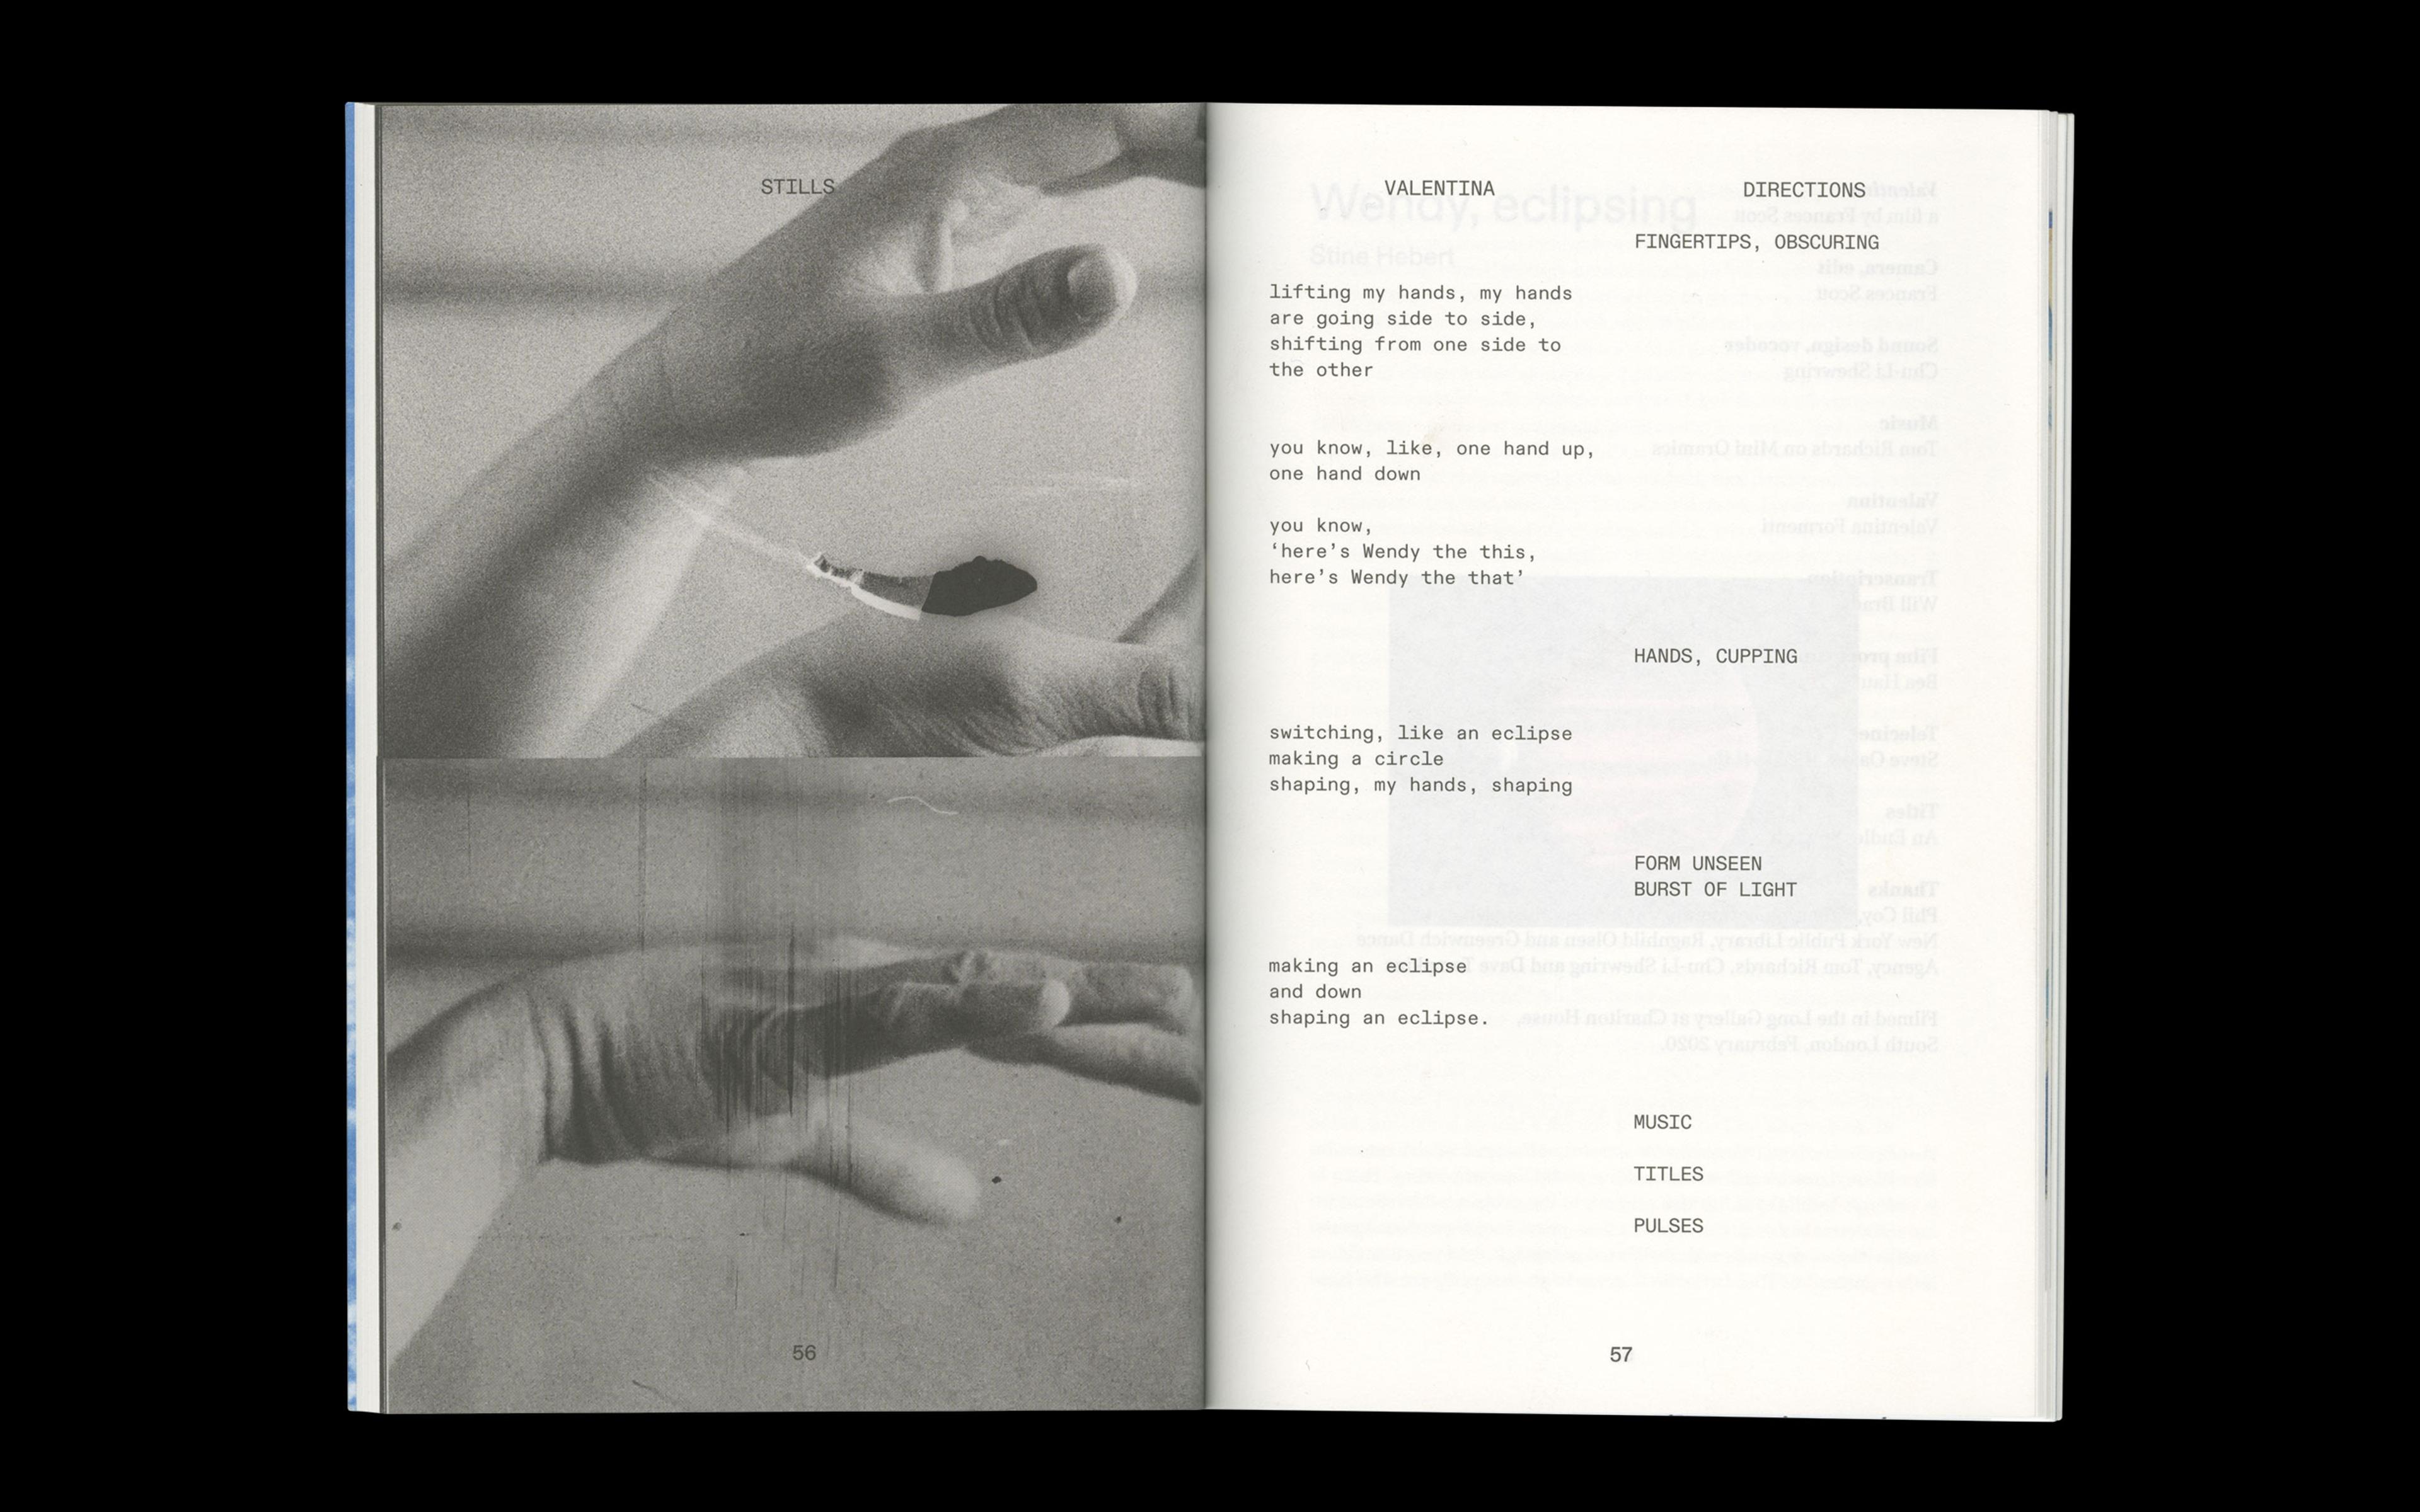 Scan of internal spread of 'Incantation, Wendy' by Frances Scott showing design of chapter transcribing a film work.